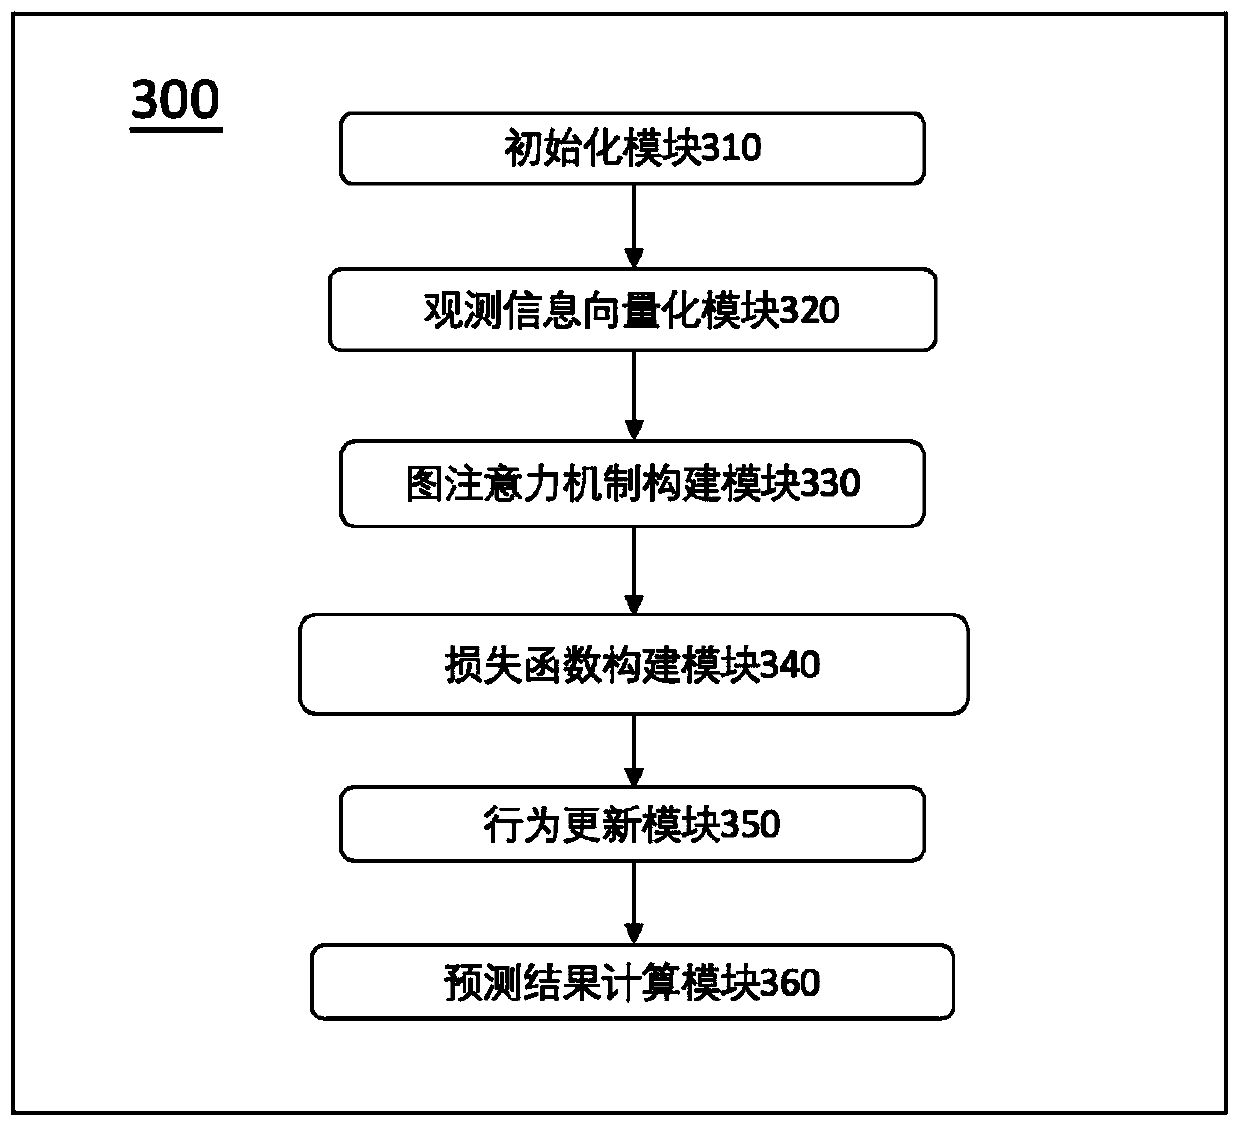 Traffic signal control method and system based on reinforcement learning and graph attention network